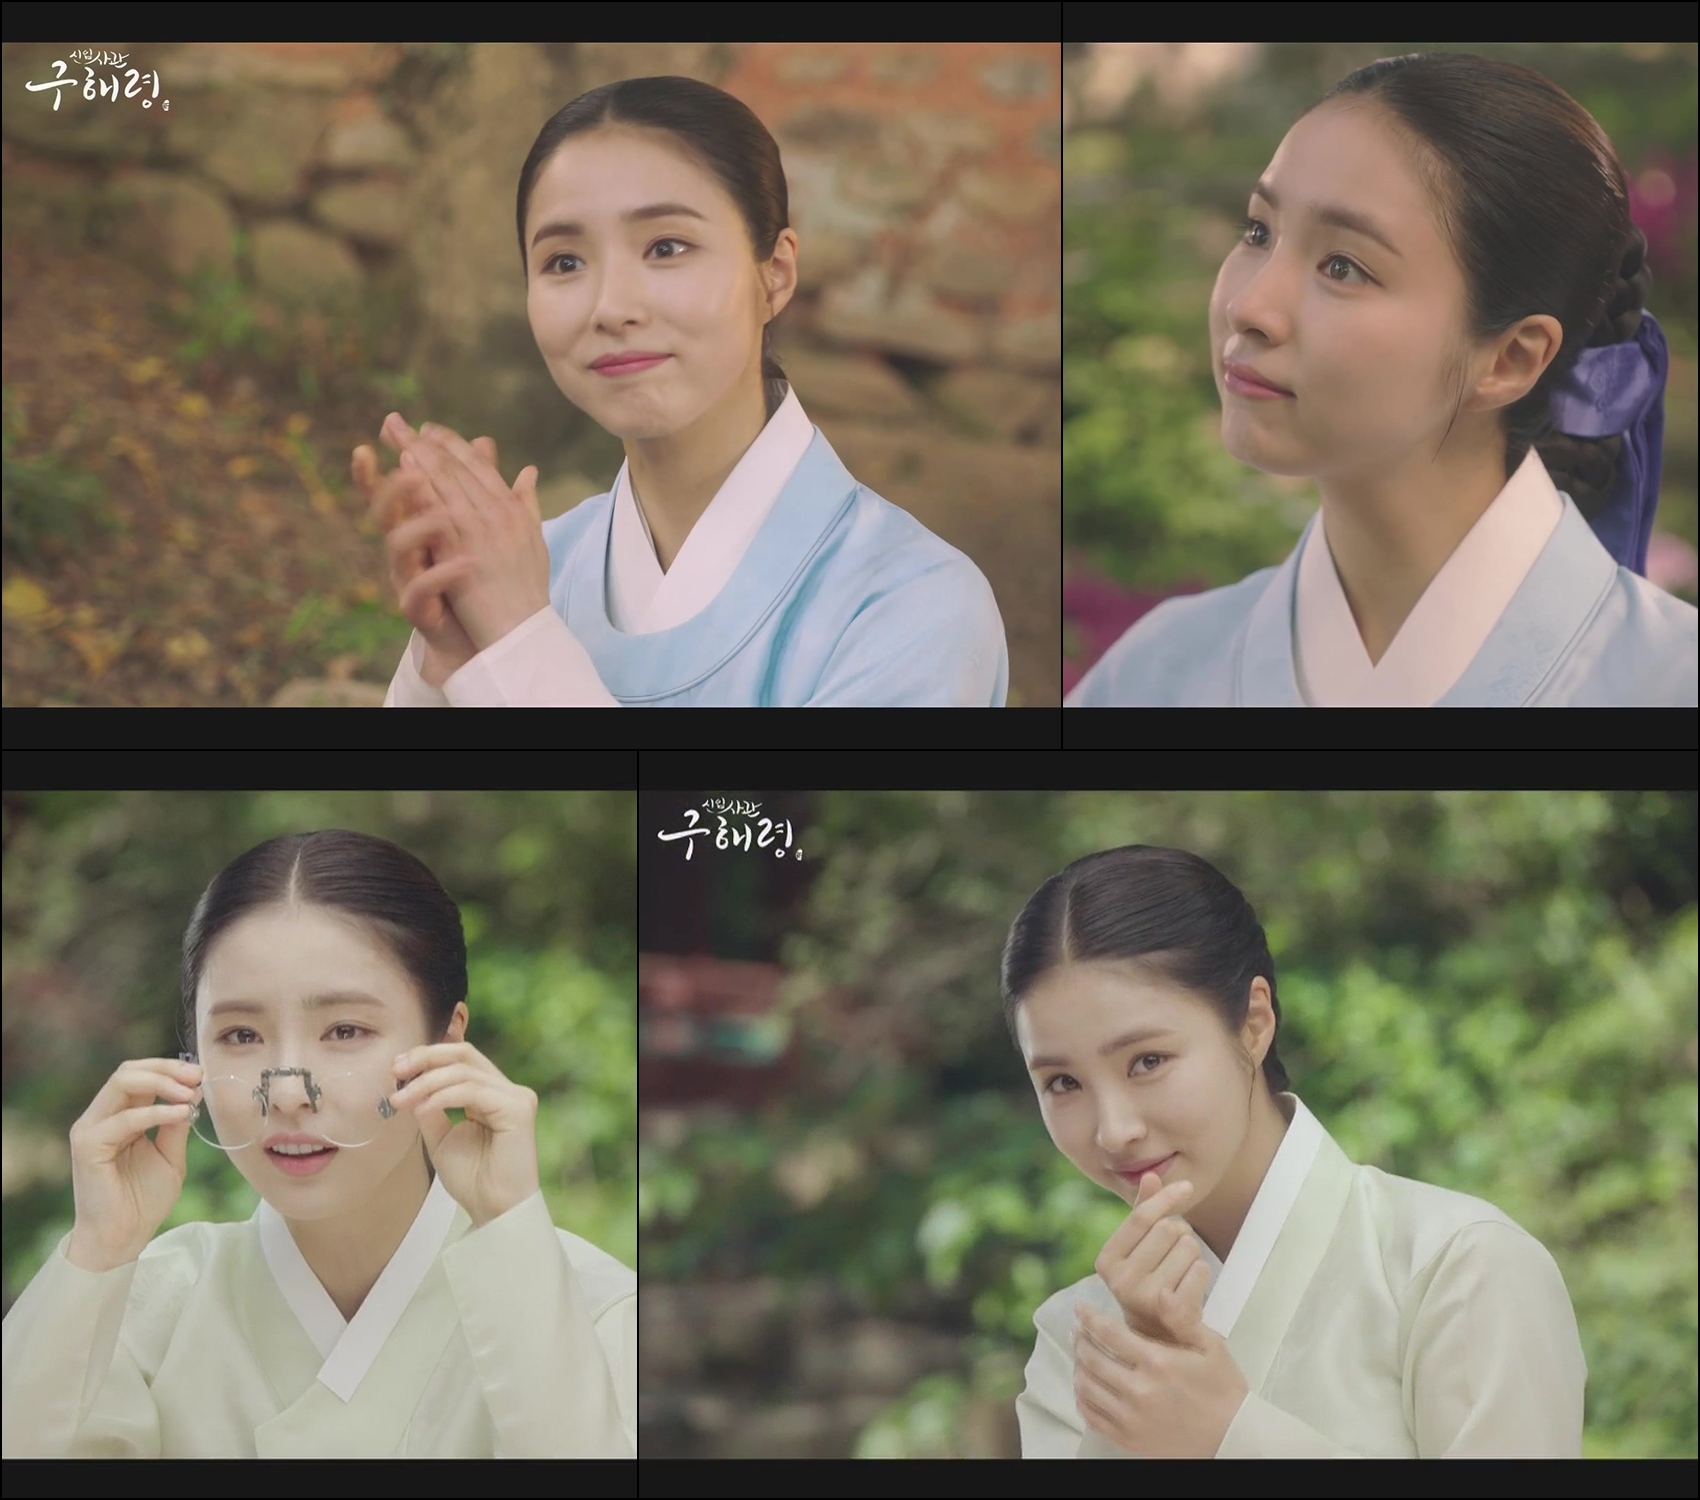 Shin Se-kyung in the Na Hae-ryung is like Fish in water.Thanks to the brilliant performance of Shin Se-kyung, the leading actor in the story, MBC drama Na Hae-ryung has been sticking to the top spot in the drama.Especially, the reaction to Shin Se-kyung, who perfectly depicts the unique Ada Lovelace () Koo Na Hae-ryung character of Joseon as if he were wearing a perfect dress, is hot.The point that made the admiration happen is Shin Se-kyungs excellent complete control Acting.The attention is focused on his comic acting, which he has never seen before, as he has firmly captured viewers with his acting, which is comic, serious, pleasant and heavy.Shin Se-kyung, who is well-known as the owner of solid inner space and elegant expressive power, makes a laugh by bringing out the comic elements buried in the poles.Unlike himself, who cleaned every corner of the melted sugar, Shin Se-kyung conducts a cool revenge on Cha Eun-woo, who enjoys rest.He made a mistake, dropped the broomstick, and succeeded in blowing a direct word that was blocked, and the scene of the jab of joy was born as ad-lib of Shin Se-kyung and left more intense fun.Shin Se-kyungs reaction to the laughter, which was introduced in the 17-18th, also collected topics.I look at the men with perfect body and smile with my colleagues Ada Lovelace, and I am at the peak of comic by showing a brilliant gesture such as a reciprocal but hand-heart response to a man who expressed his favor.In addition, Shin Se-kyungs extraordinary tax revenue method has devastated online beyond the room.Anyone could not help laughing at him, watching him splashing water in every direction.Shin Se-kyung, who is picking up a laughing point placed in the story and bringing fresh fun.In response to the enthusiastic reaction of the pouring viewers, he said, I am free to express the appearance of Na Hae-ryung as it is, and I am grateful that you like it a lot and send me a great love.Shin Se-kyung, who has been active in various genres, has expanded to the Accusing Spectrum of Comic and has obtained various modifiers such as Acting Manleb and Shin Se-kyung, who is full of comics, romance, and growth stories as a cadet, is drawing drama.Attention is focused on how to make us laugh and cry in the new employee Na Hae-ryung, which has made the return point.iMBC  Photo MBC Screen Capture